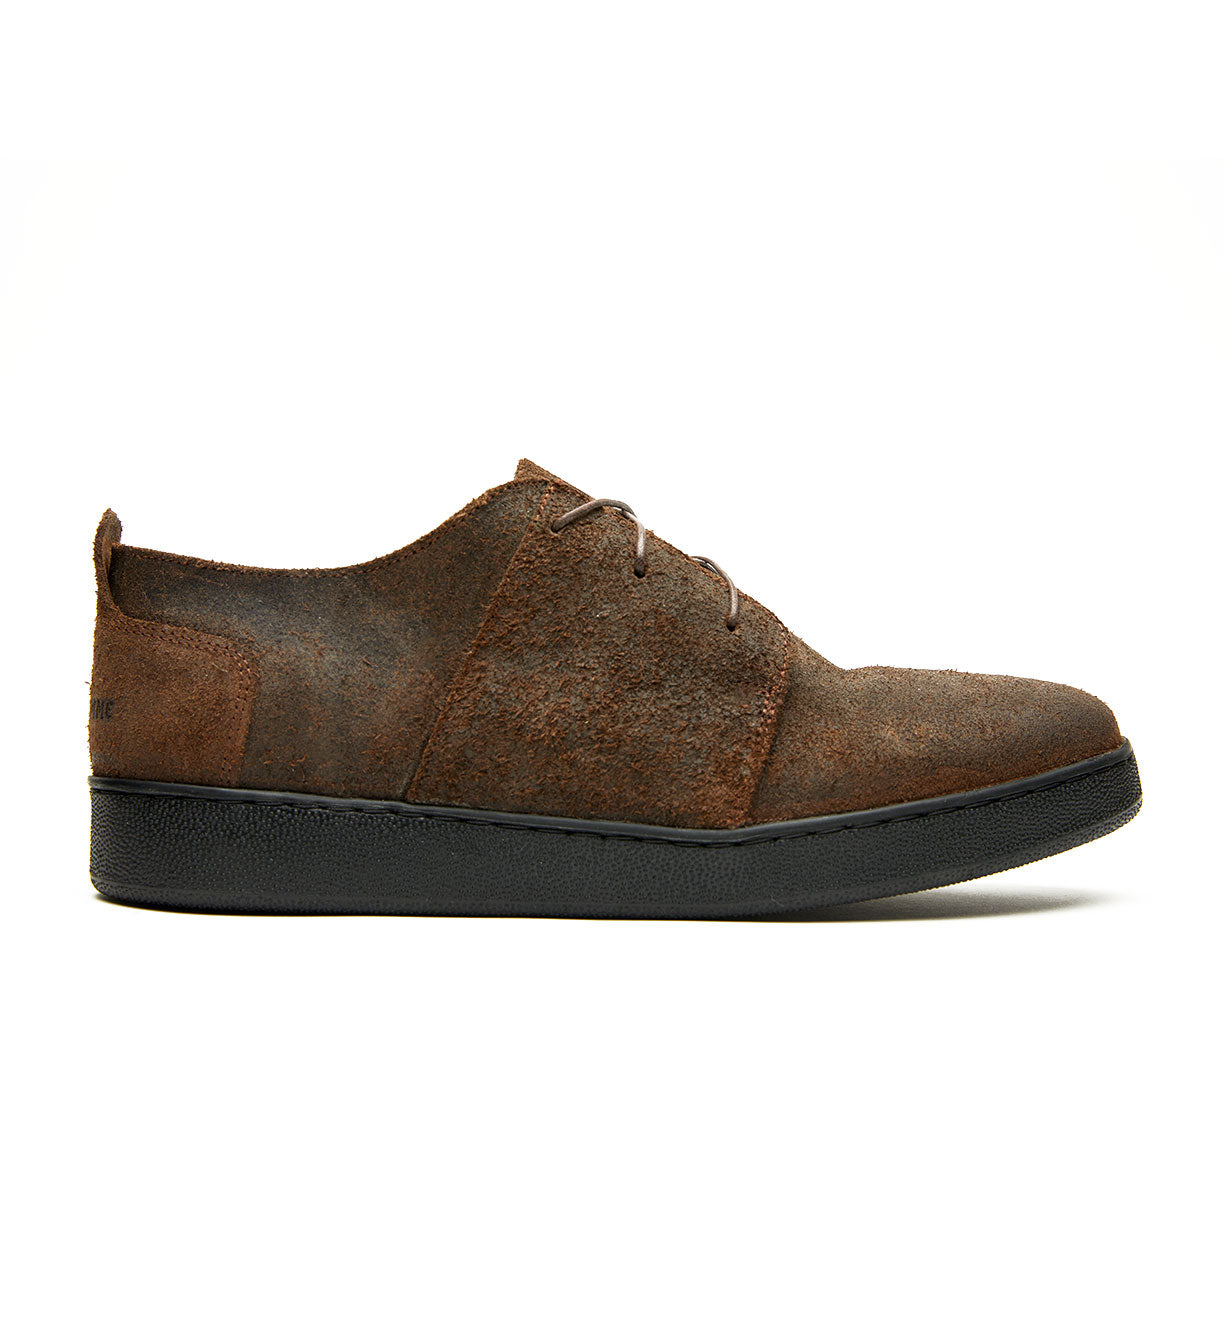 A men's Ben Low sneaker by Broken Homme, with a cork filled midsole and recycled black outsole.